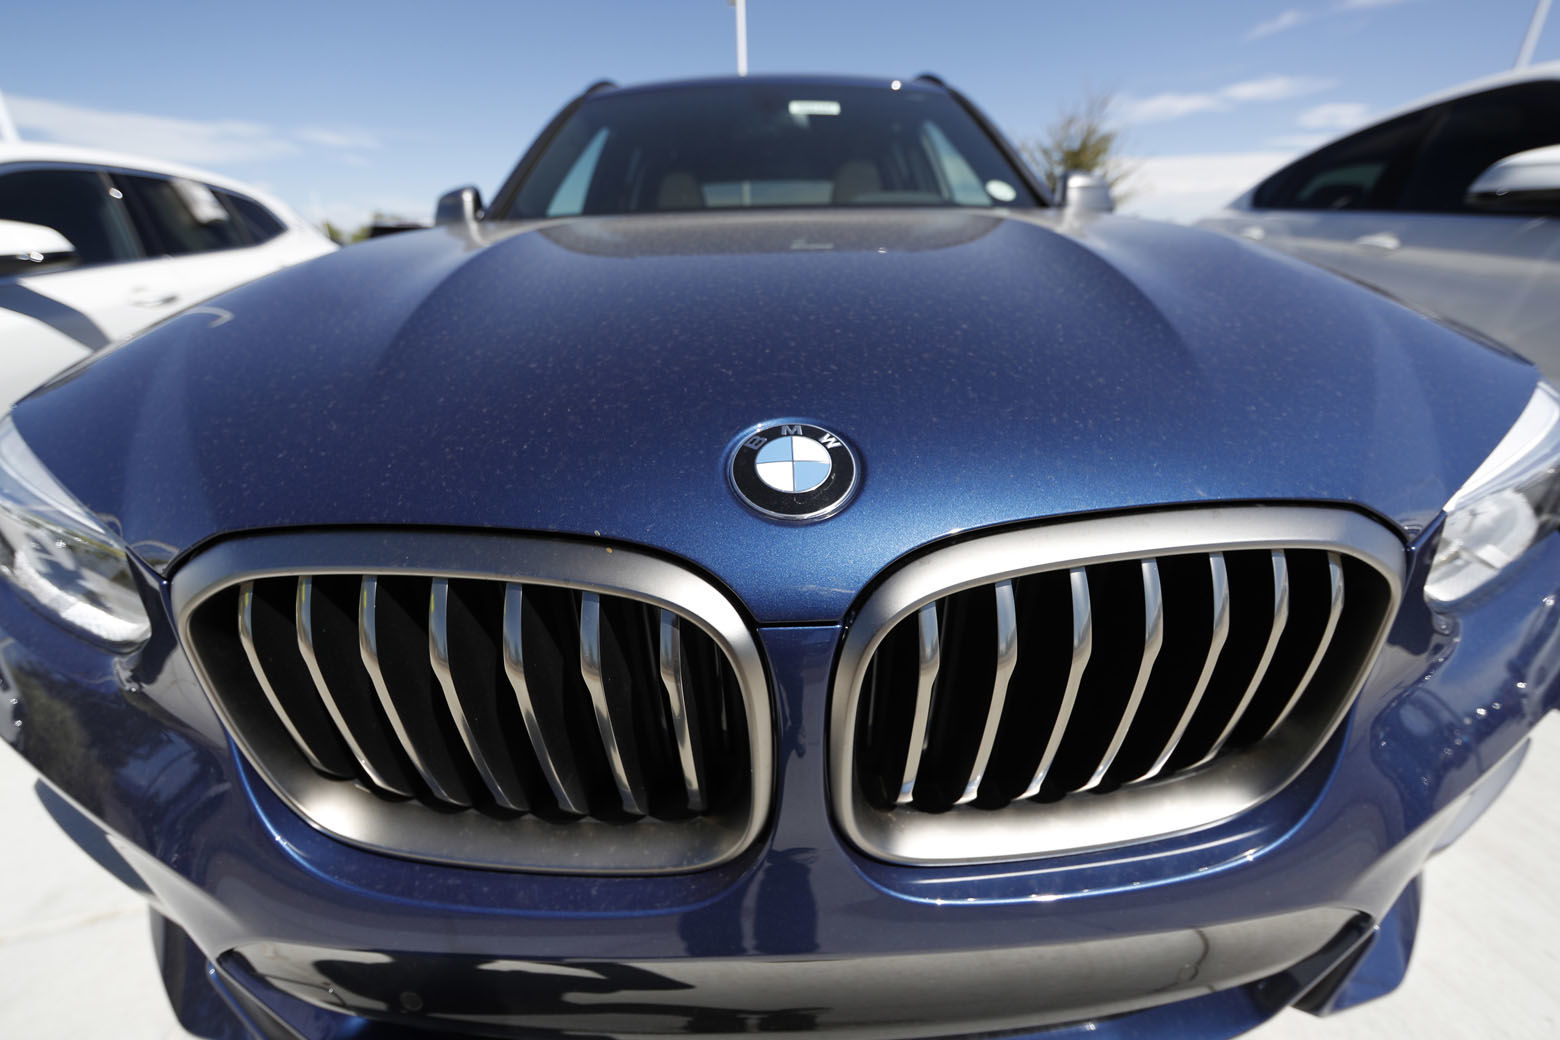 In this Thursday, Aug. 30, 2018, photograph, the nose of a an unsold 2018 X3 sports utility vehicle is shown at a BMW dealership in Highlands Ranch, Colo. (AP Photo/David Zalubowski)